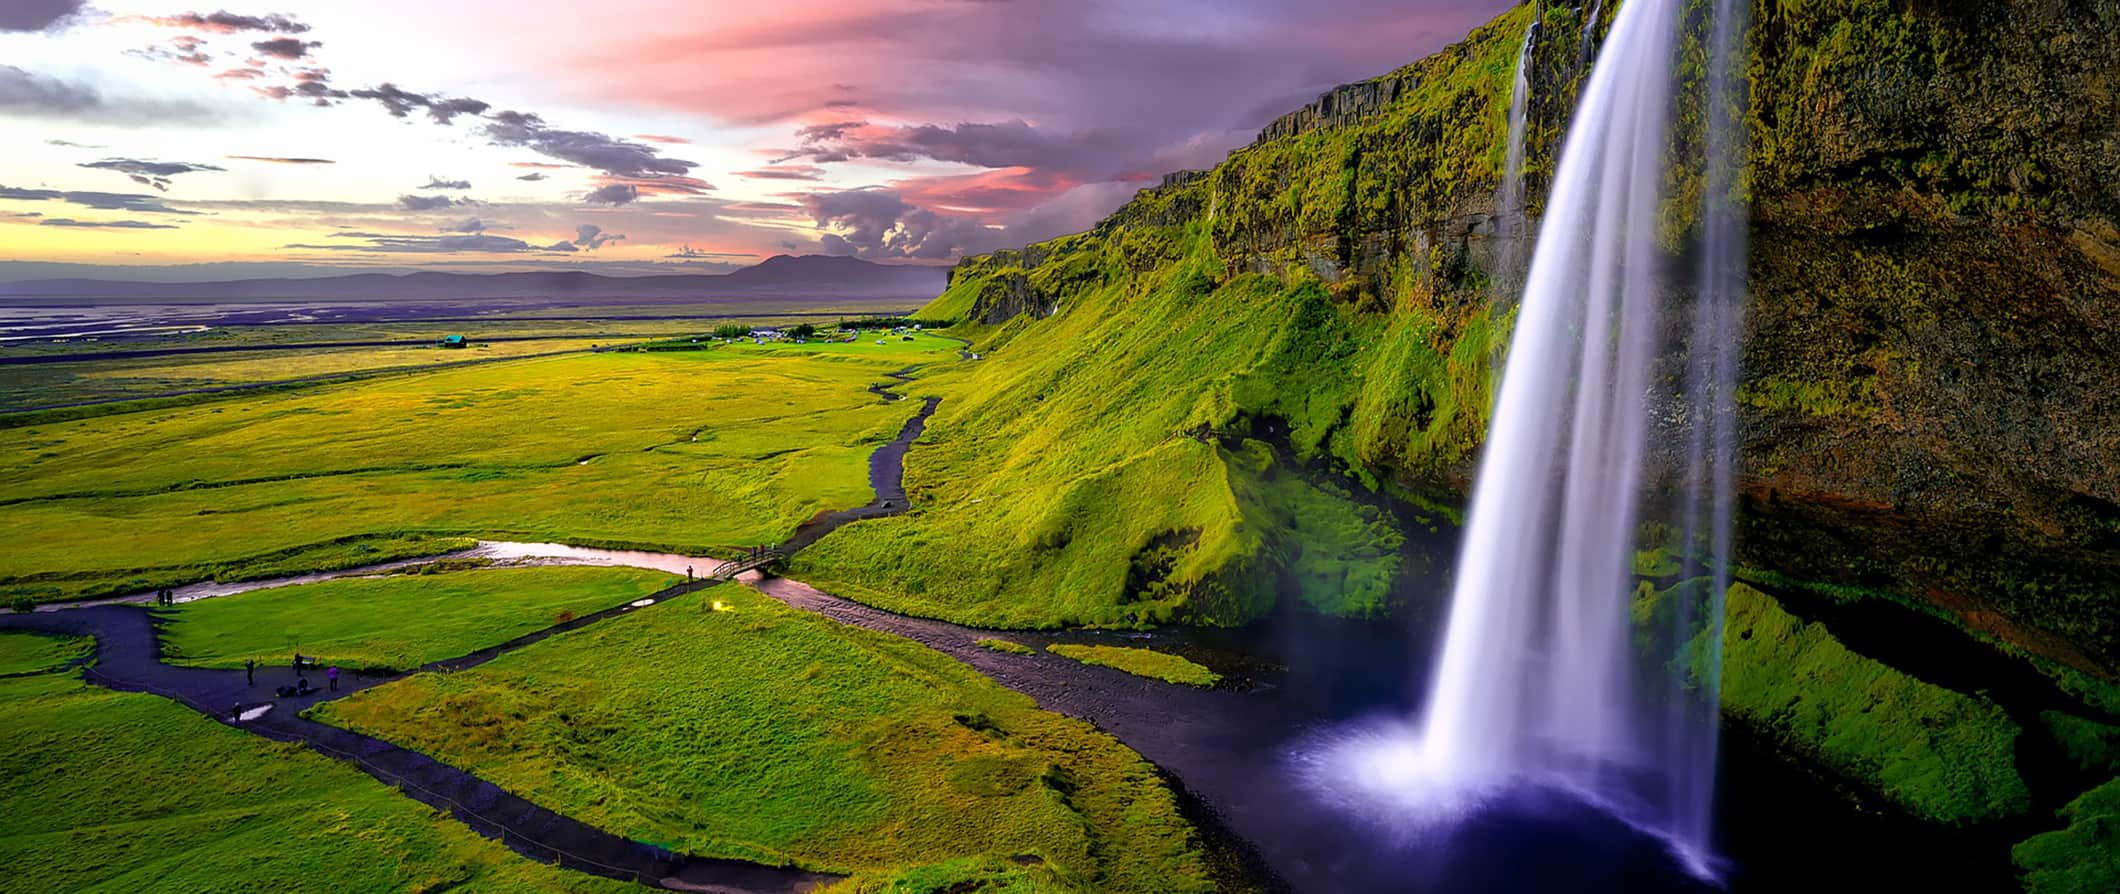 one of Iceland's many waterfalls, at sunset